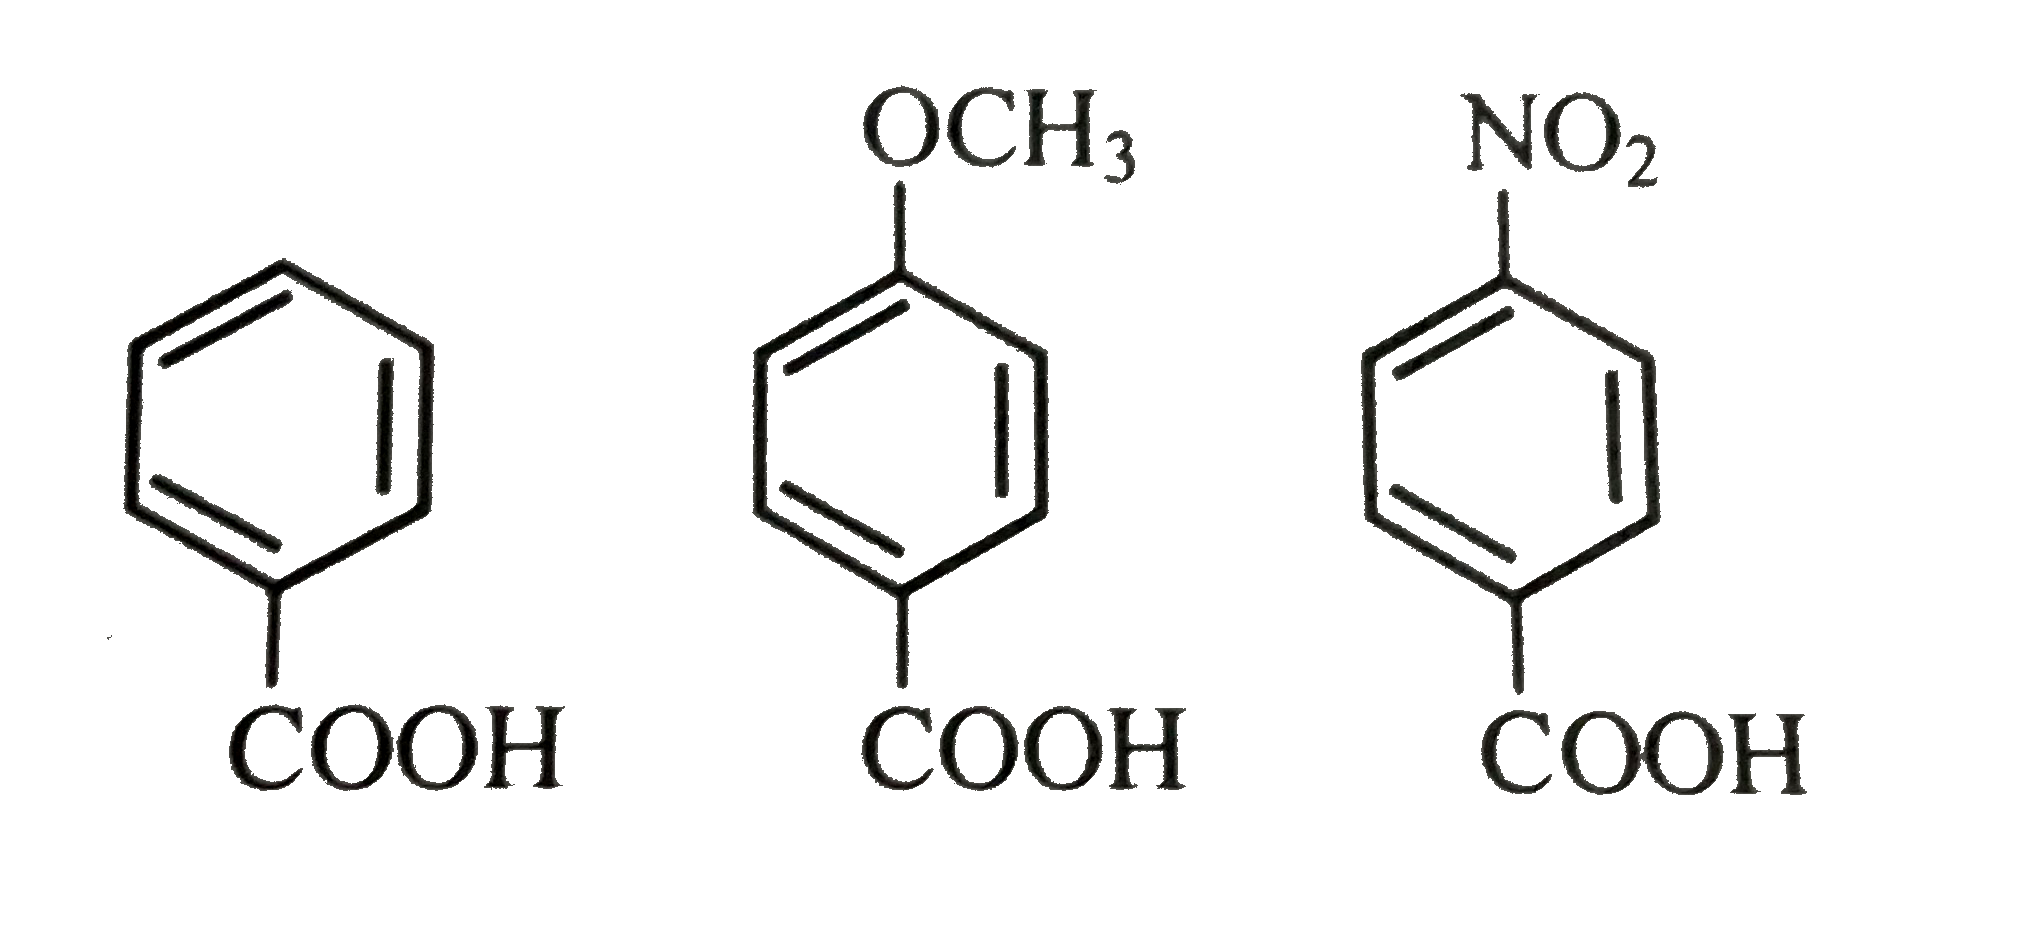 the  correct  order  of acidity  of the  following  compounds is